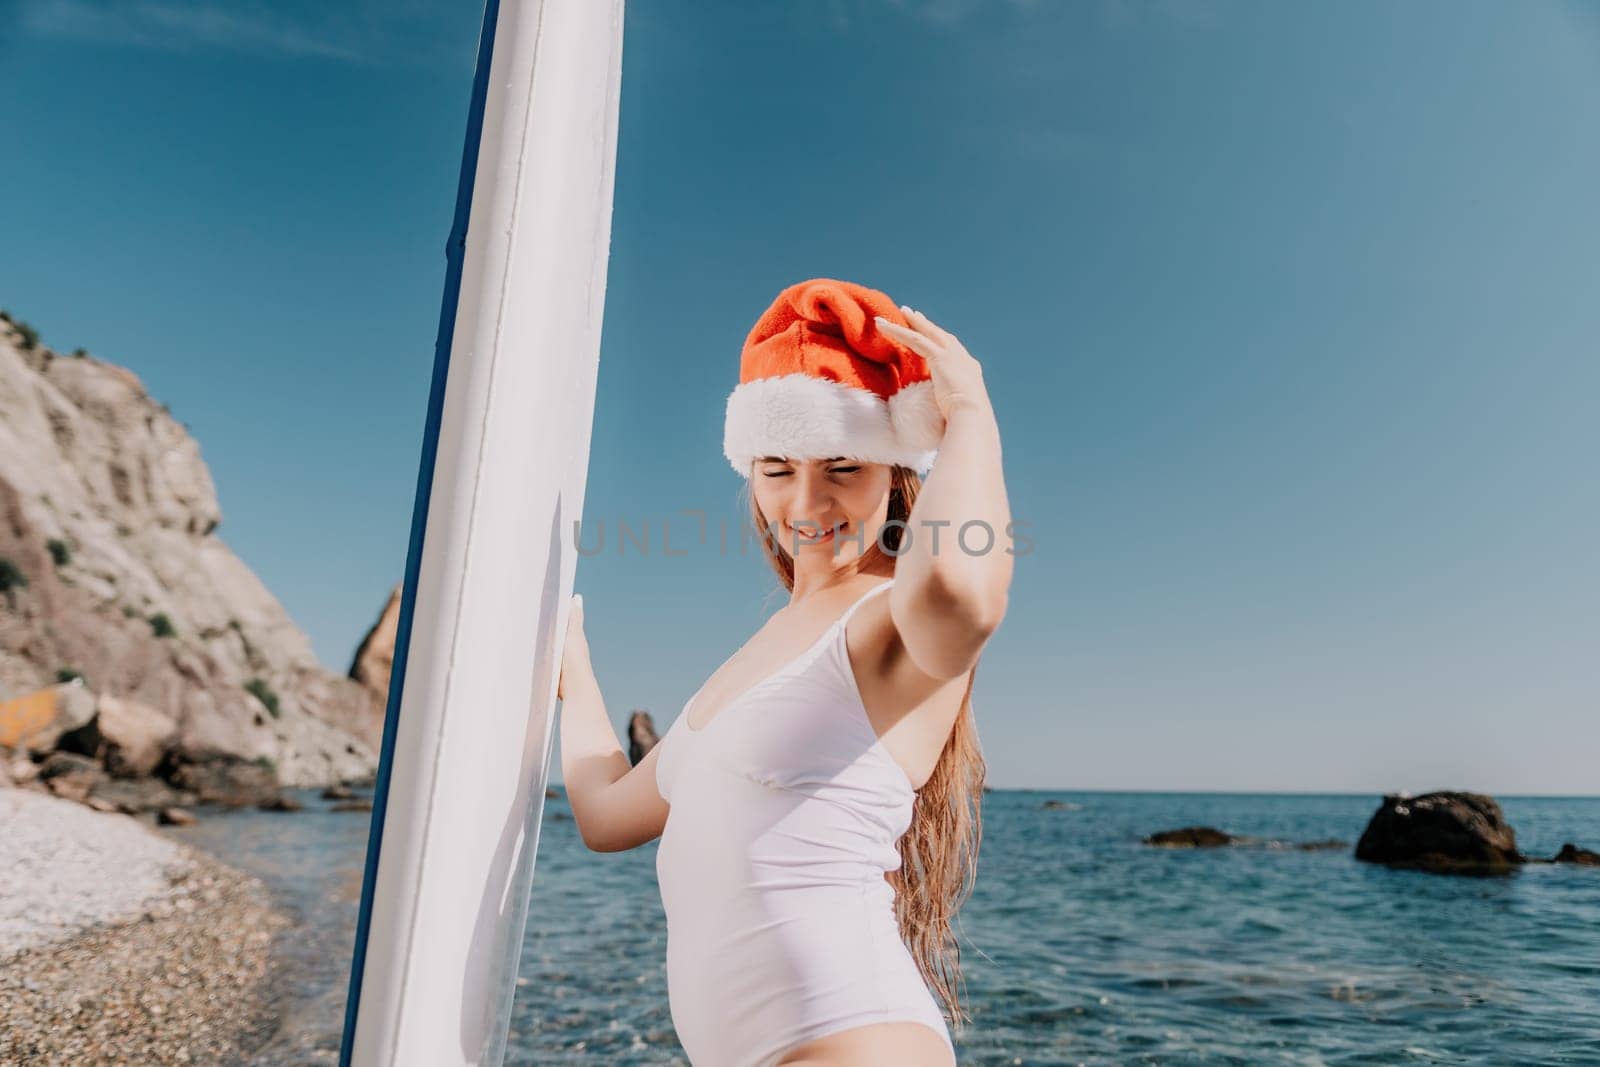 Woman sea sup. Close up portrait of happy young caucasian woman with long hair in Santa hat looking at camera and smiling. Cute woman portrait in a white bikini posing on sup board in the sea by panophotograph